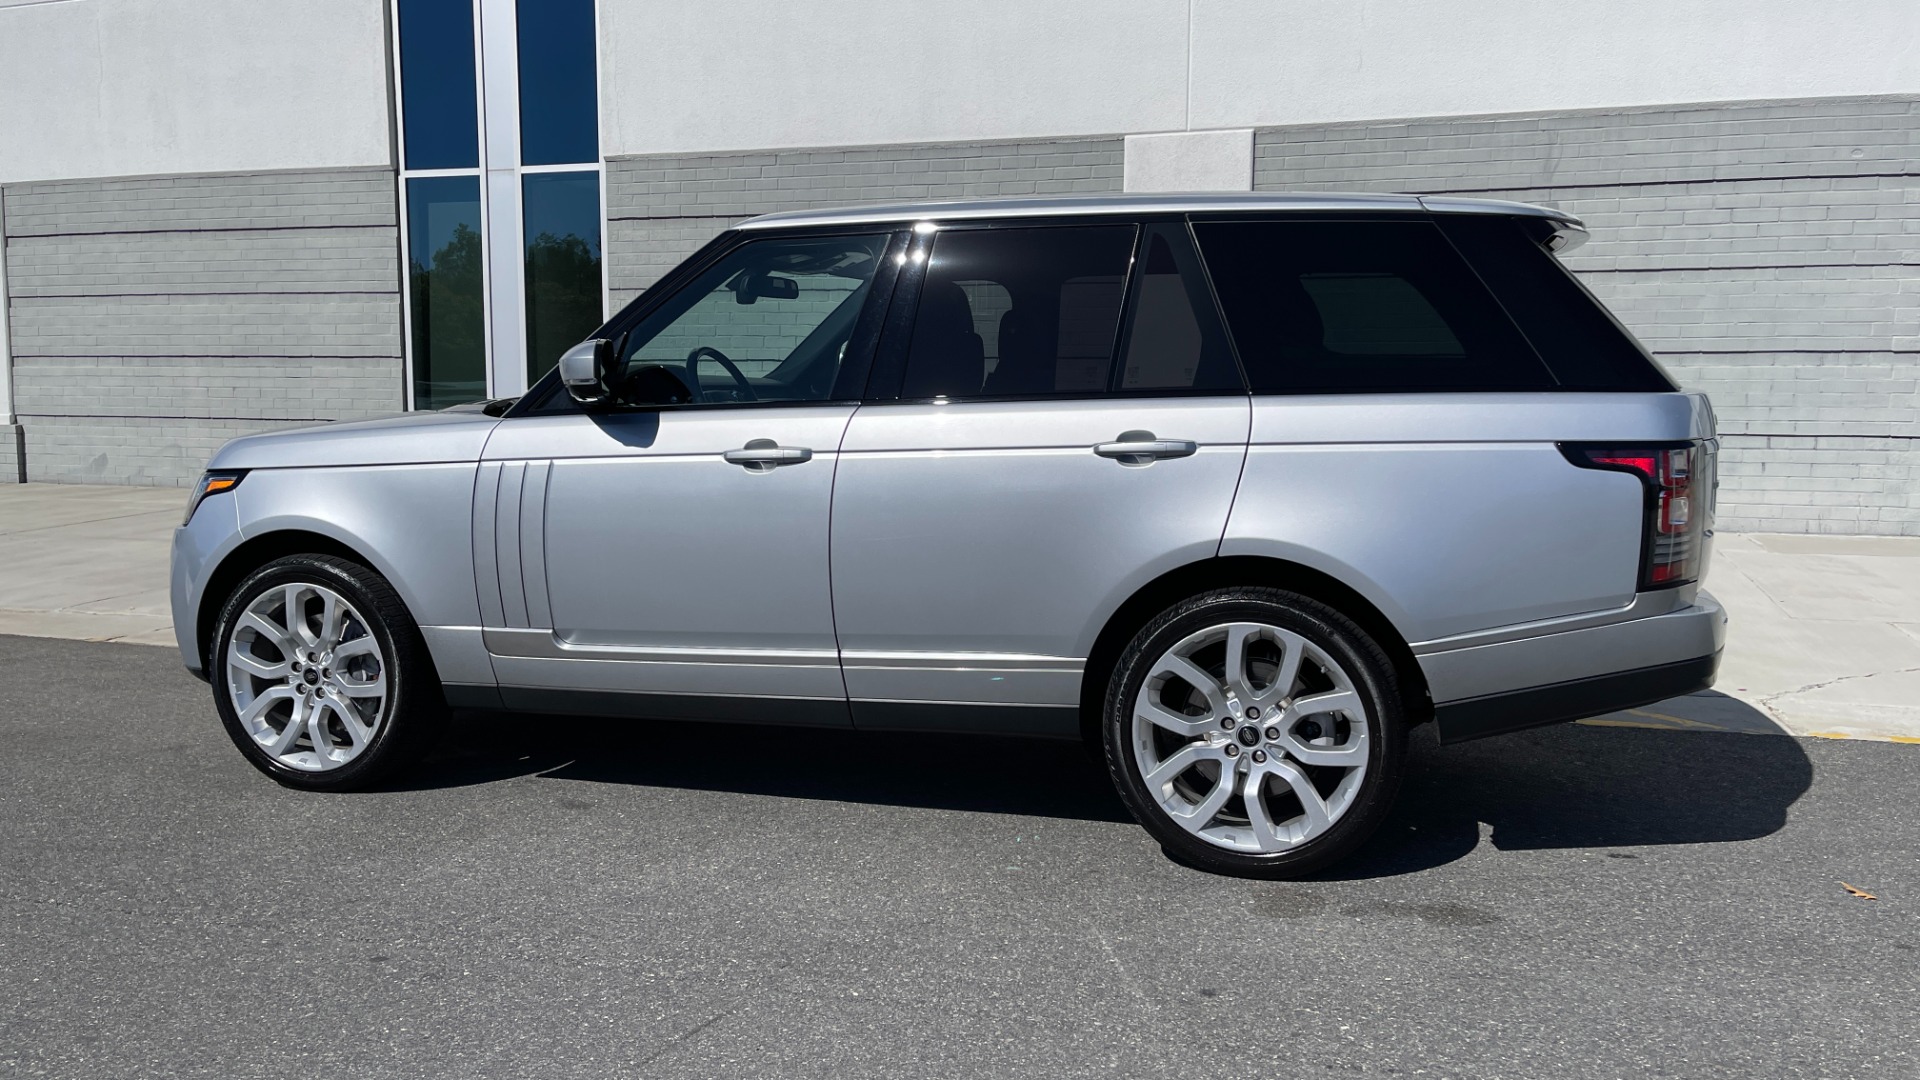 Used 2013 Land Rover Range Rover HSE / 22IN WHEELS / CLIMATE PACKAGE / SOFT CLOSE / VISION ASSIST for sale Sold at Formula Imports in Charlotte NC 28227 6